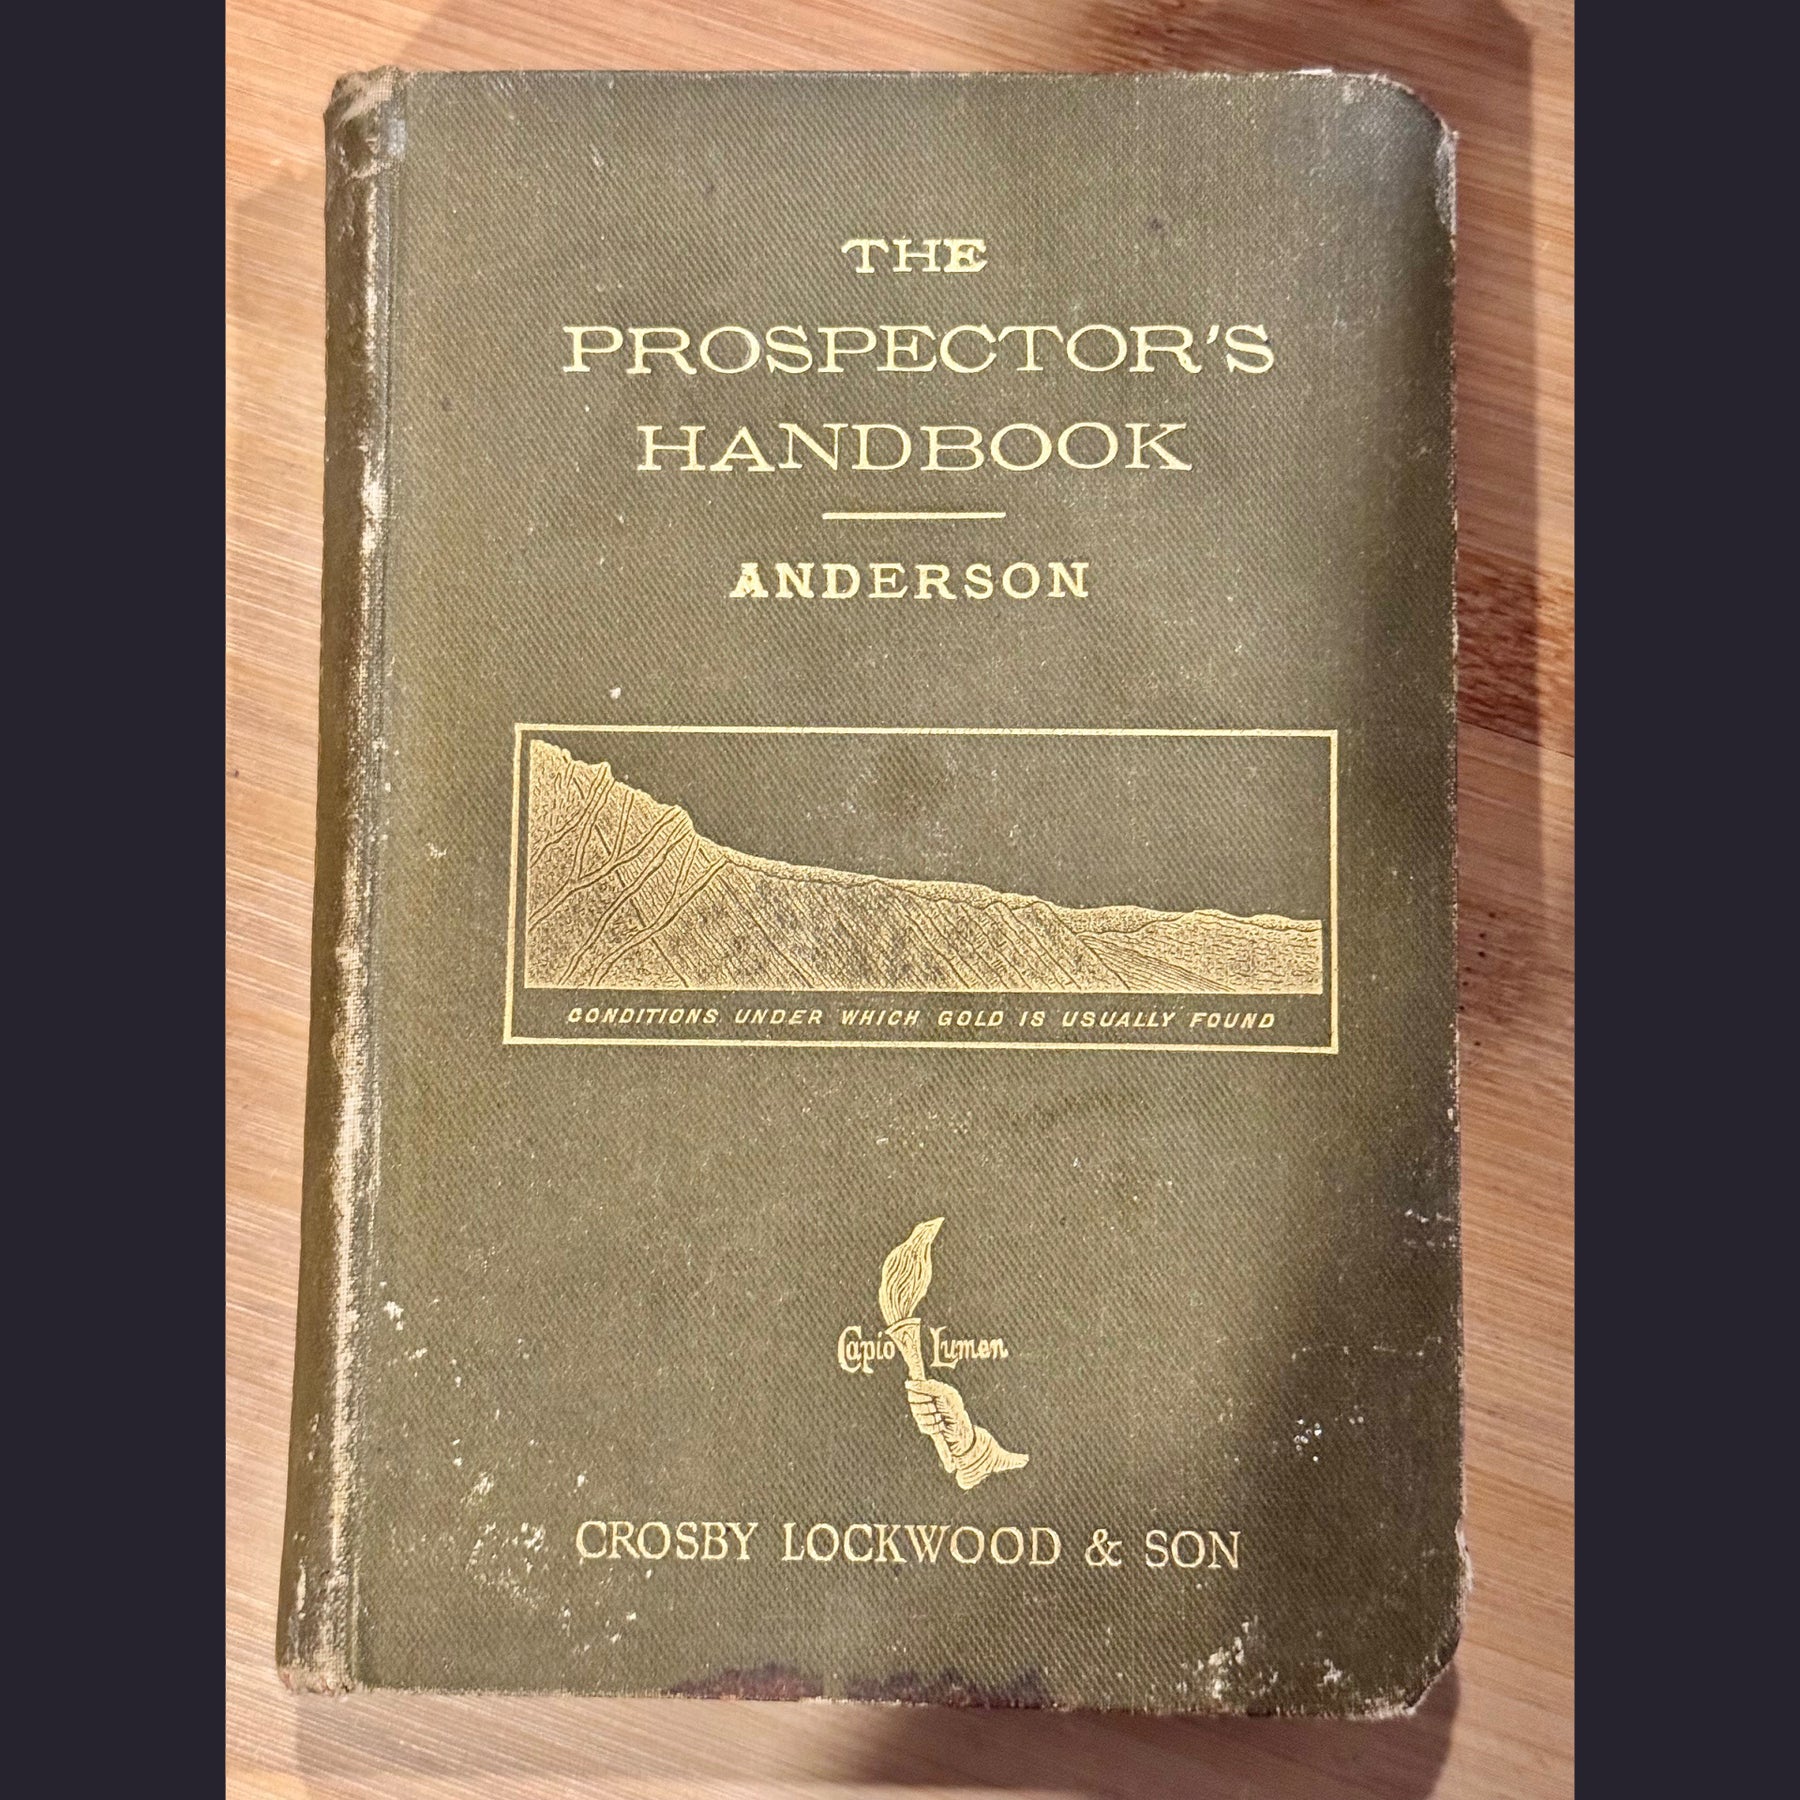 The Prospectors Handbook: Conditions Where Gold Is Usually Found (Part 1)